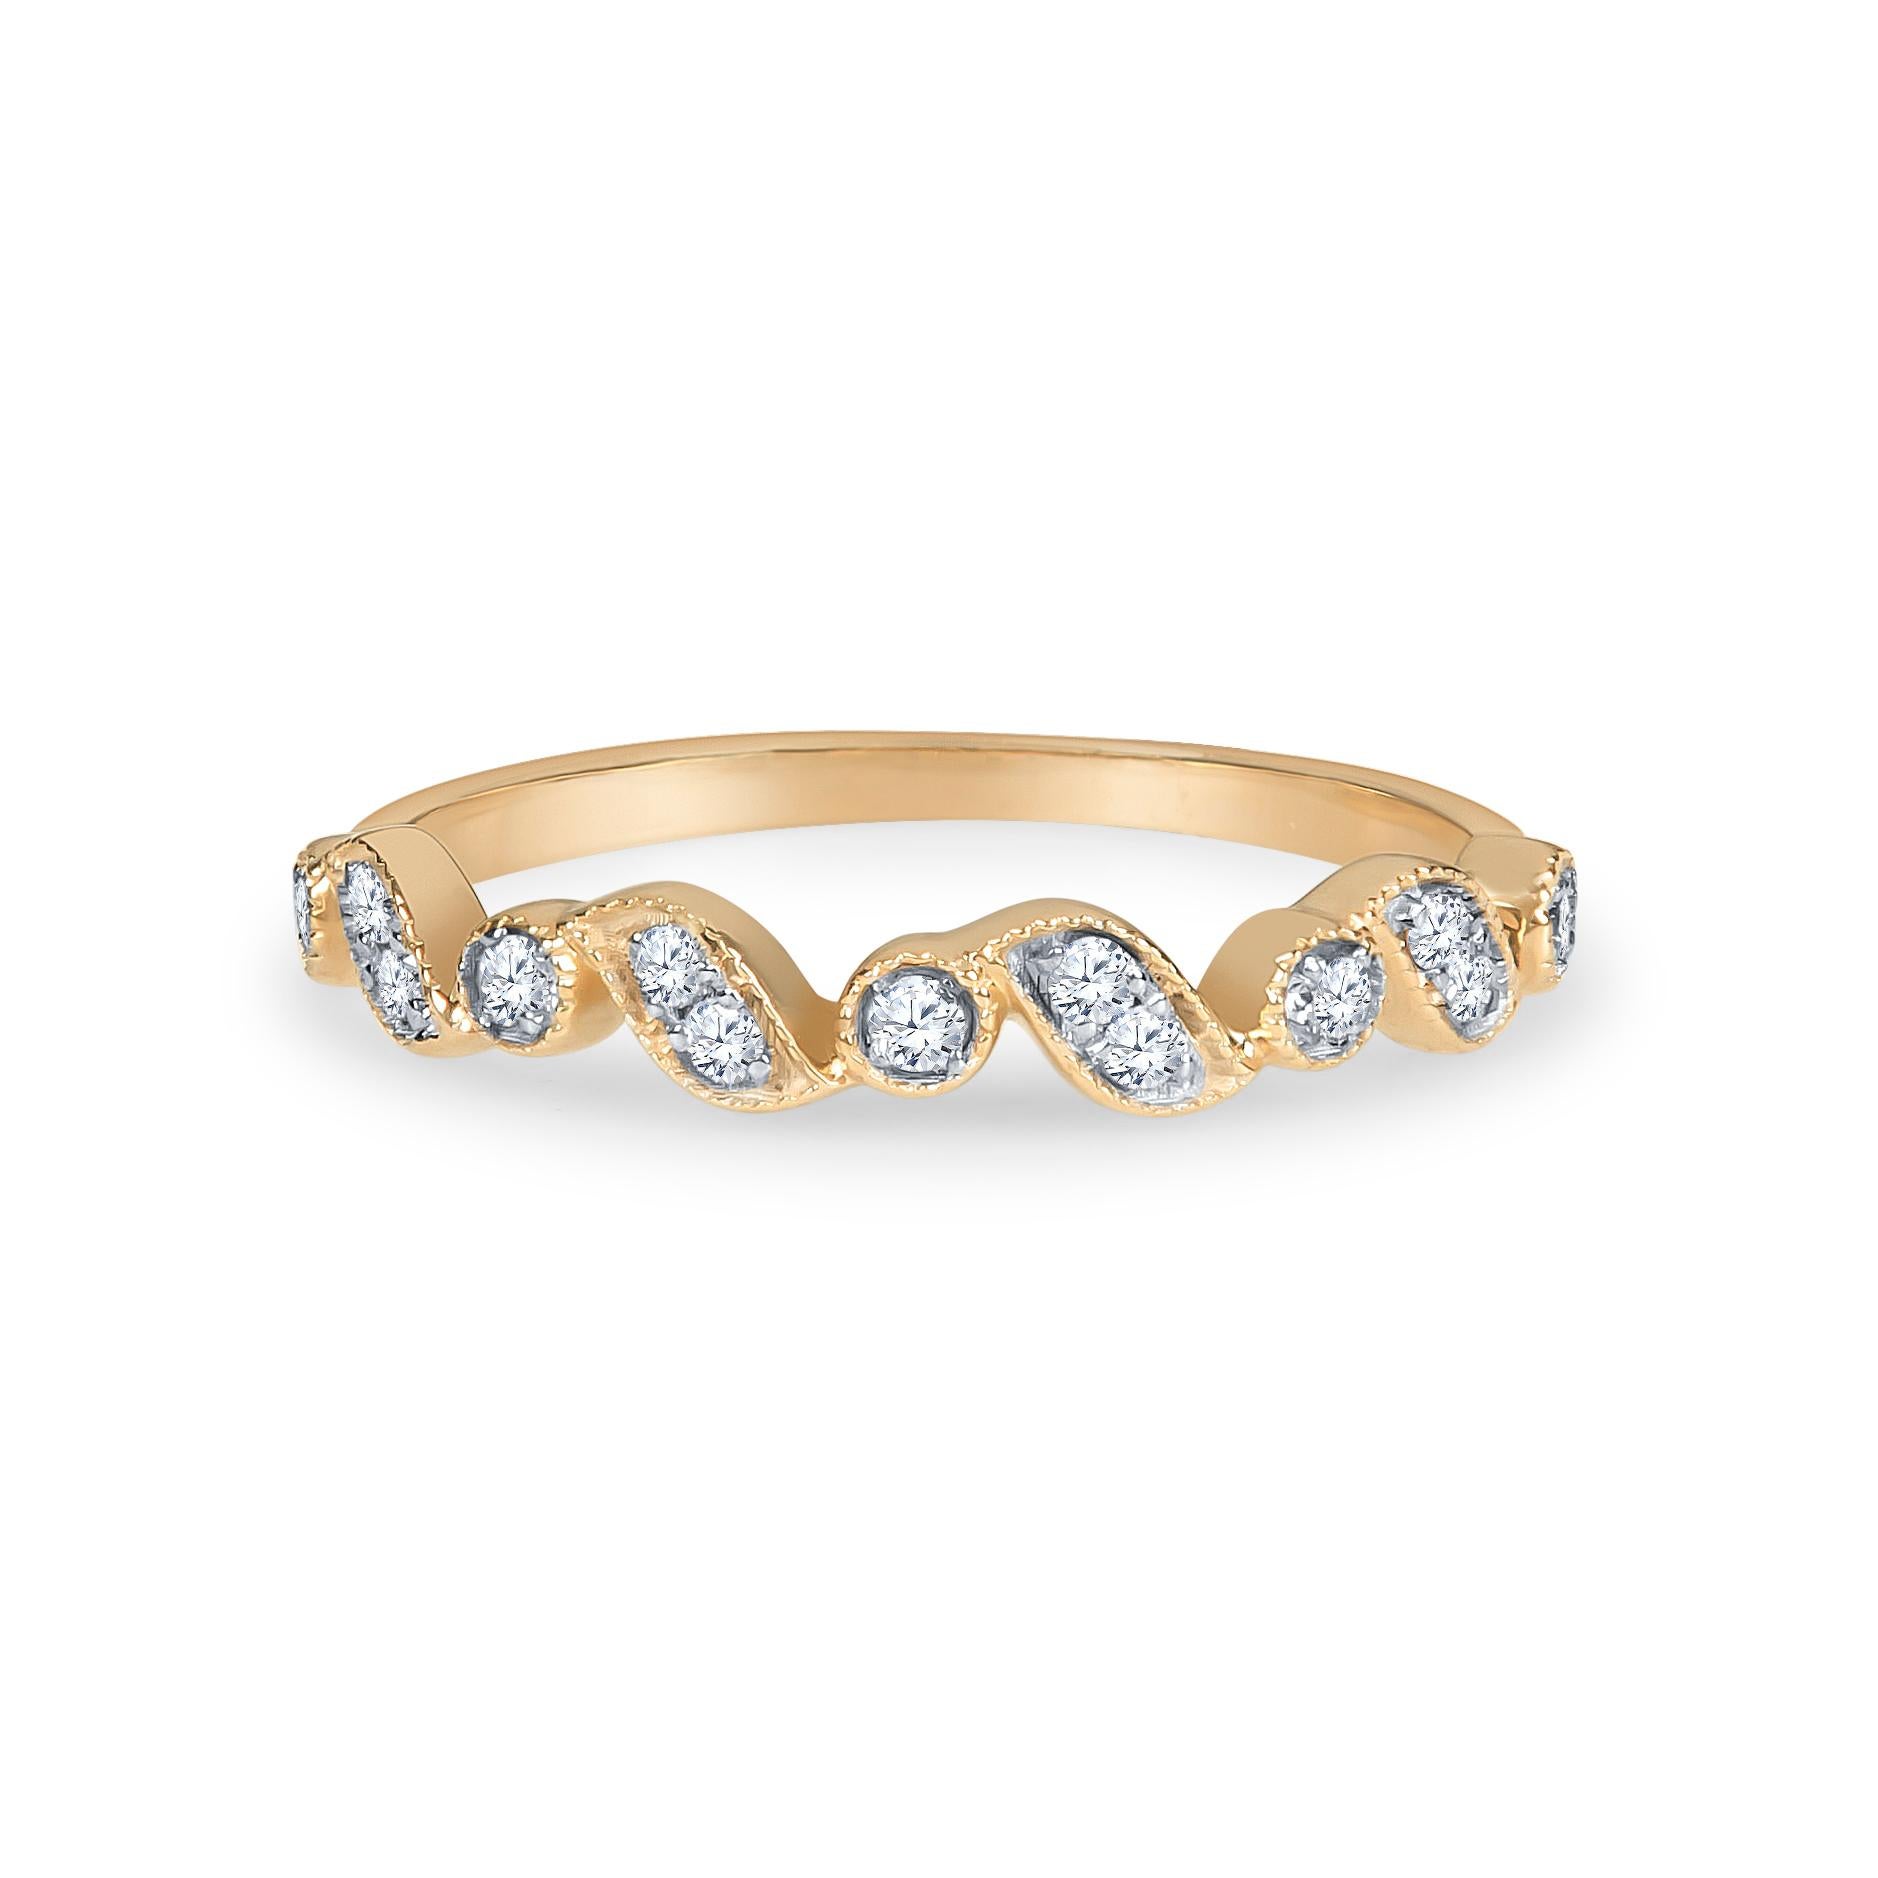 Art Nouveau Arianna Jewels 14K Gold Diamond Stackable Ring in White, Yellow and Rose Gold For Sale